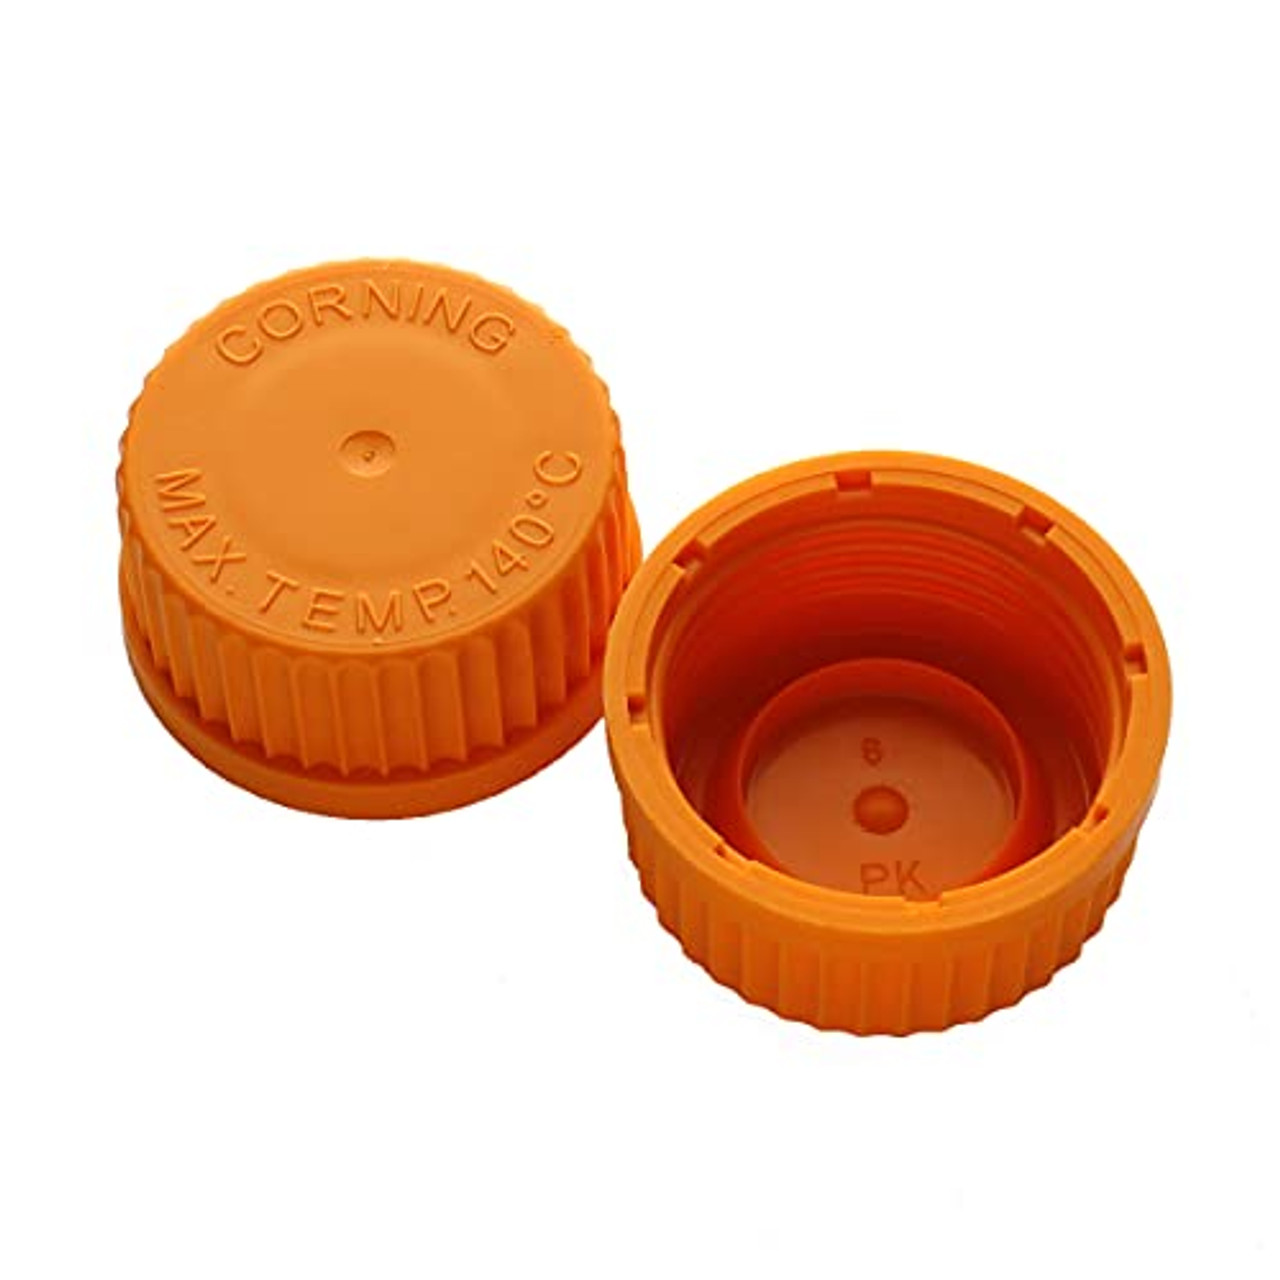 Corning Snap-Seal Disposable Plastic Sample Containers:Clinical